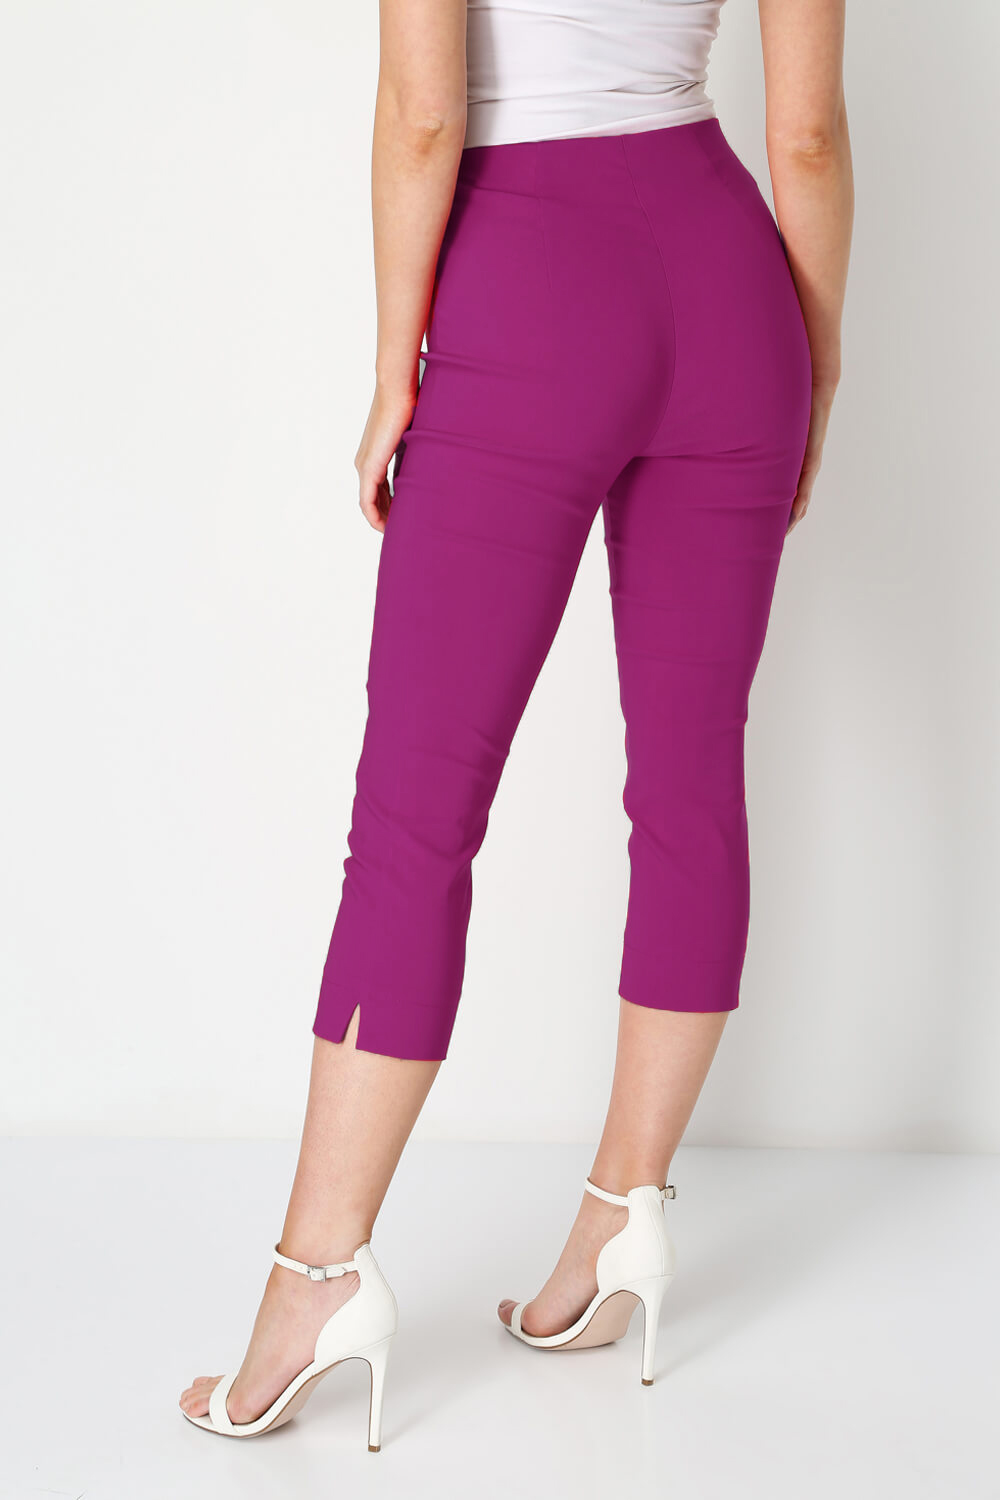 MAGENTA Cropped Stretch Trouser, Image 2 of 6